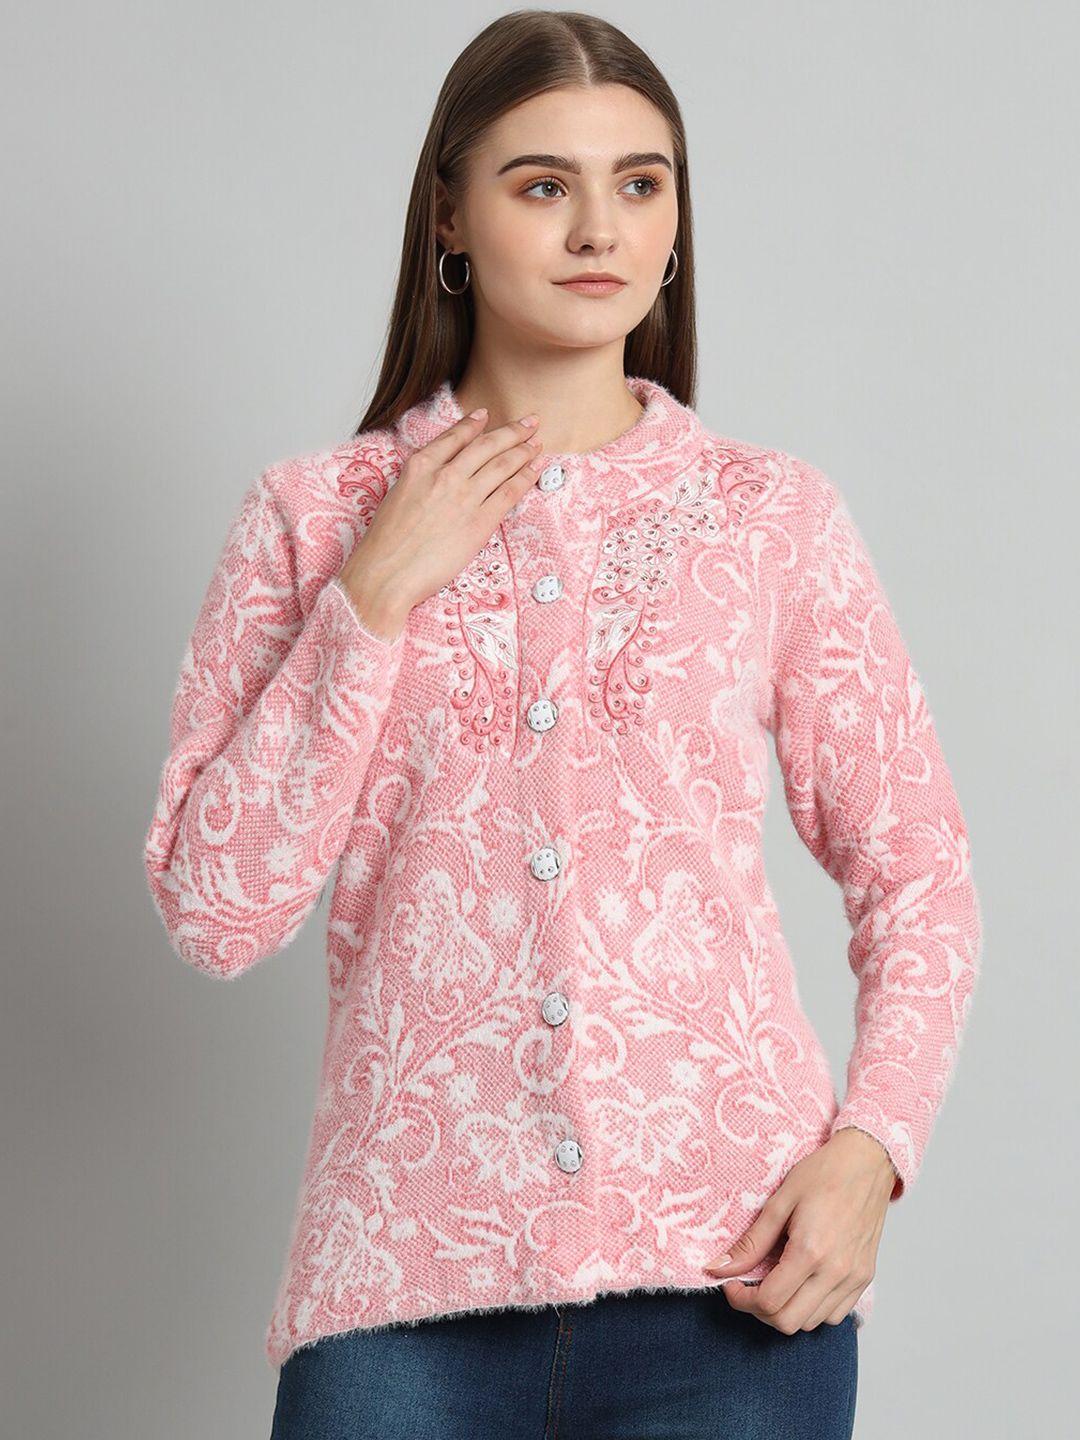 ewools floral embroidered embellished acrylic woollen cardigan